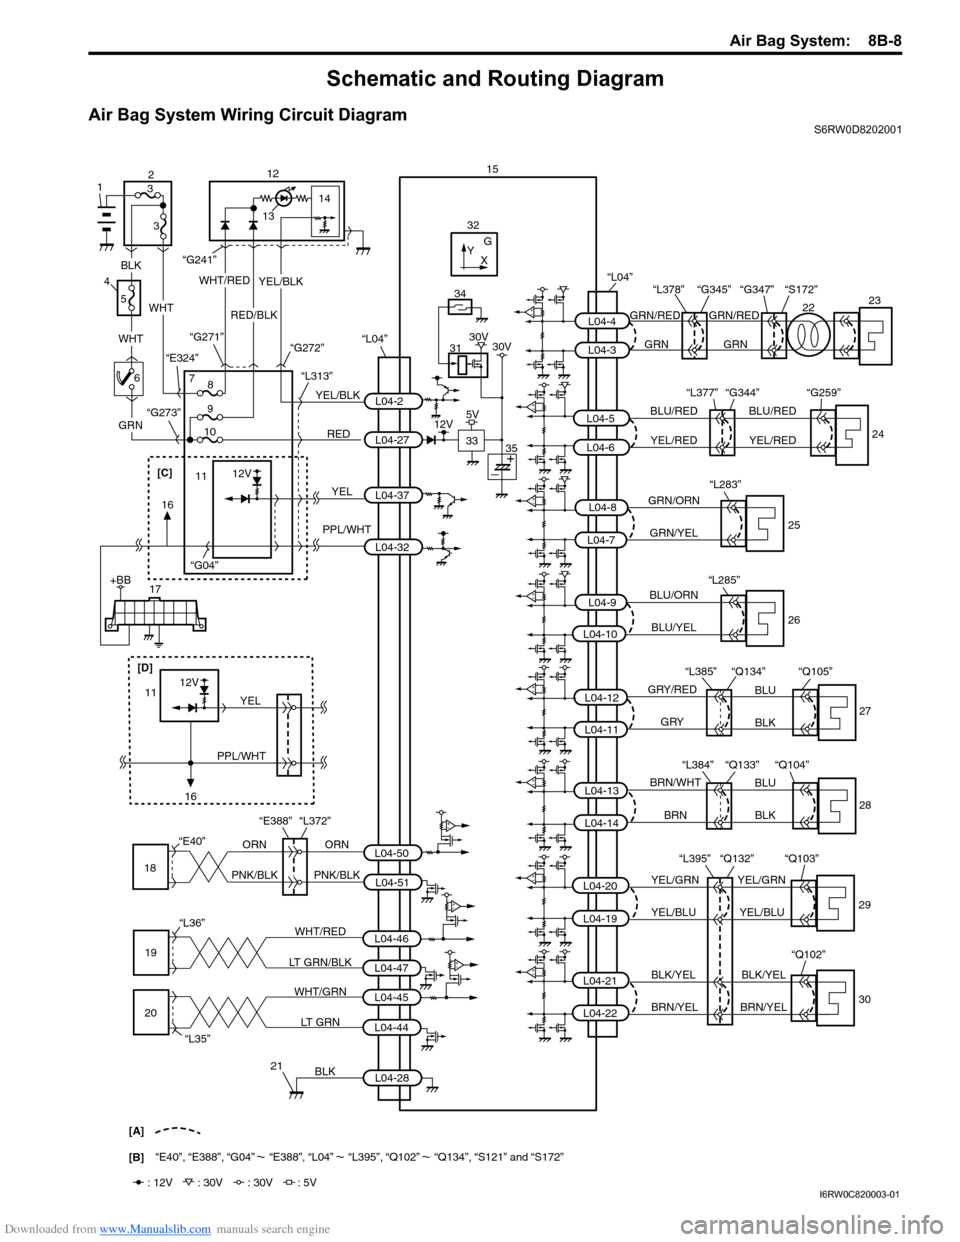 SUZUKI SX4 2006 1.G Service Workshop Manual Downloaded from www.Manualslib.com manuals search engine Air Bag System:  8B-8
Schematic and Routing Diagram
Air Bag System Wiring Circuit DiagramS6RW0D8202001
BLK
YEL/GRN YEL/GRN
YEL/BLU YEL/BLU
WHT/